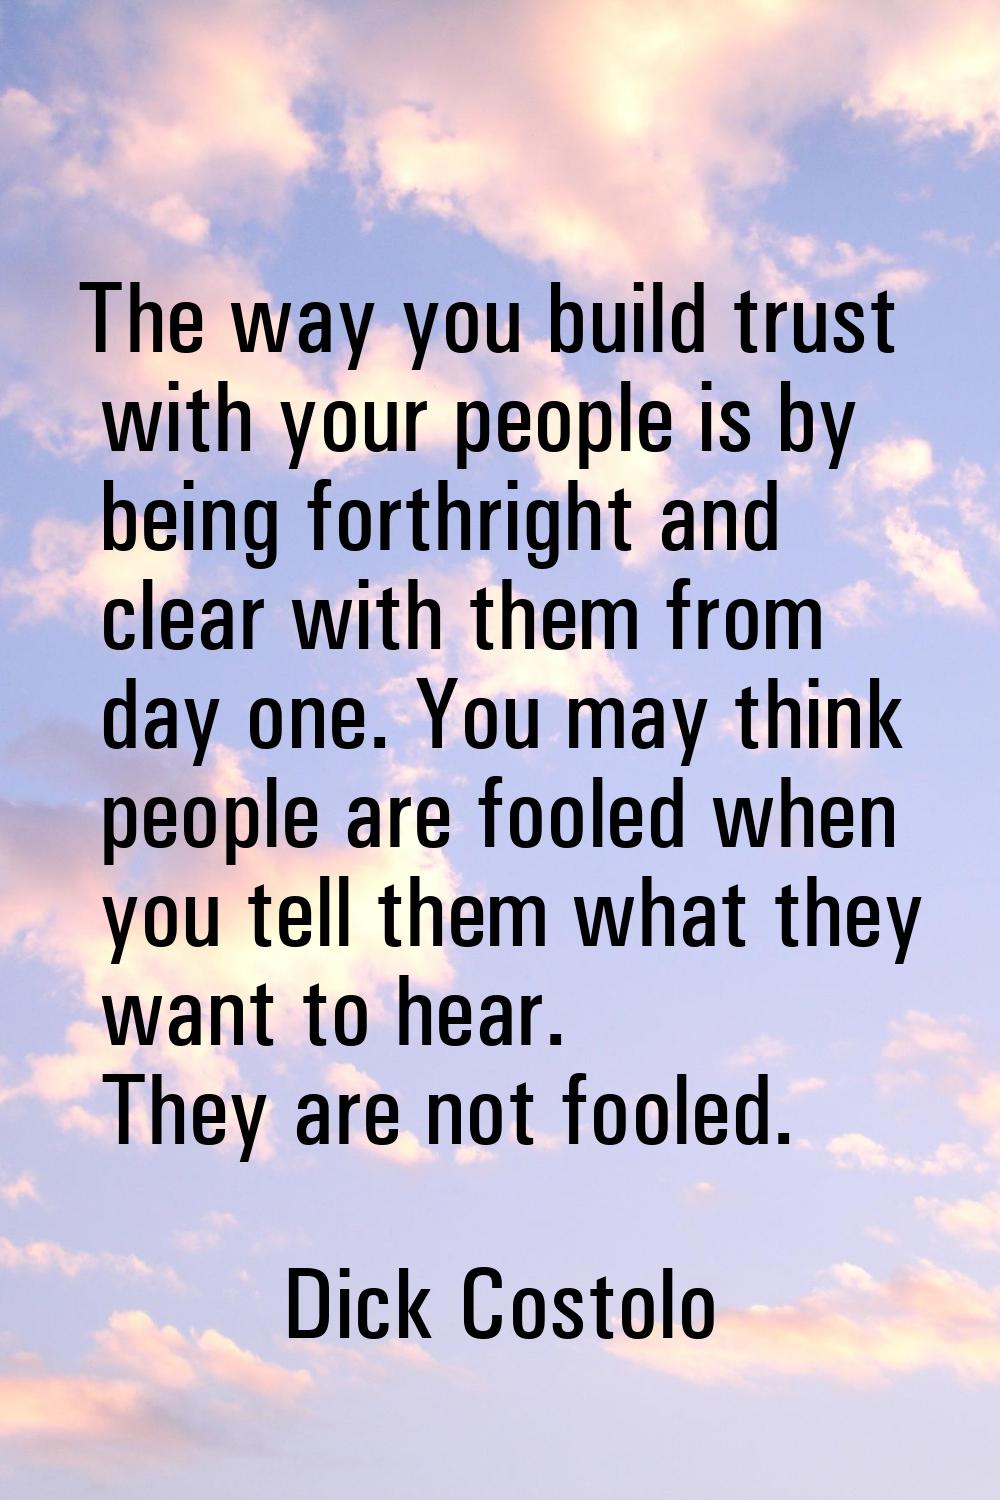 The way you build trust with your people is by being forthright and clear with them from day one. Y